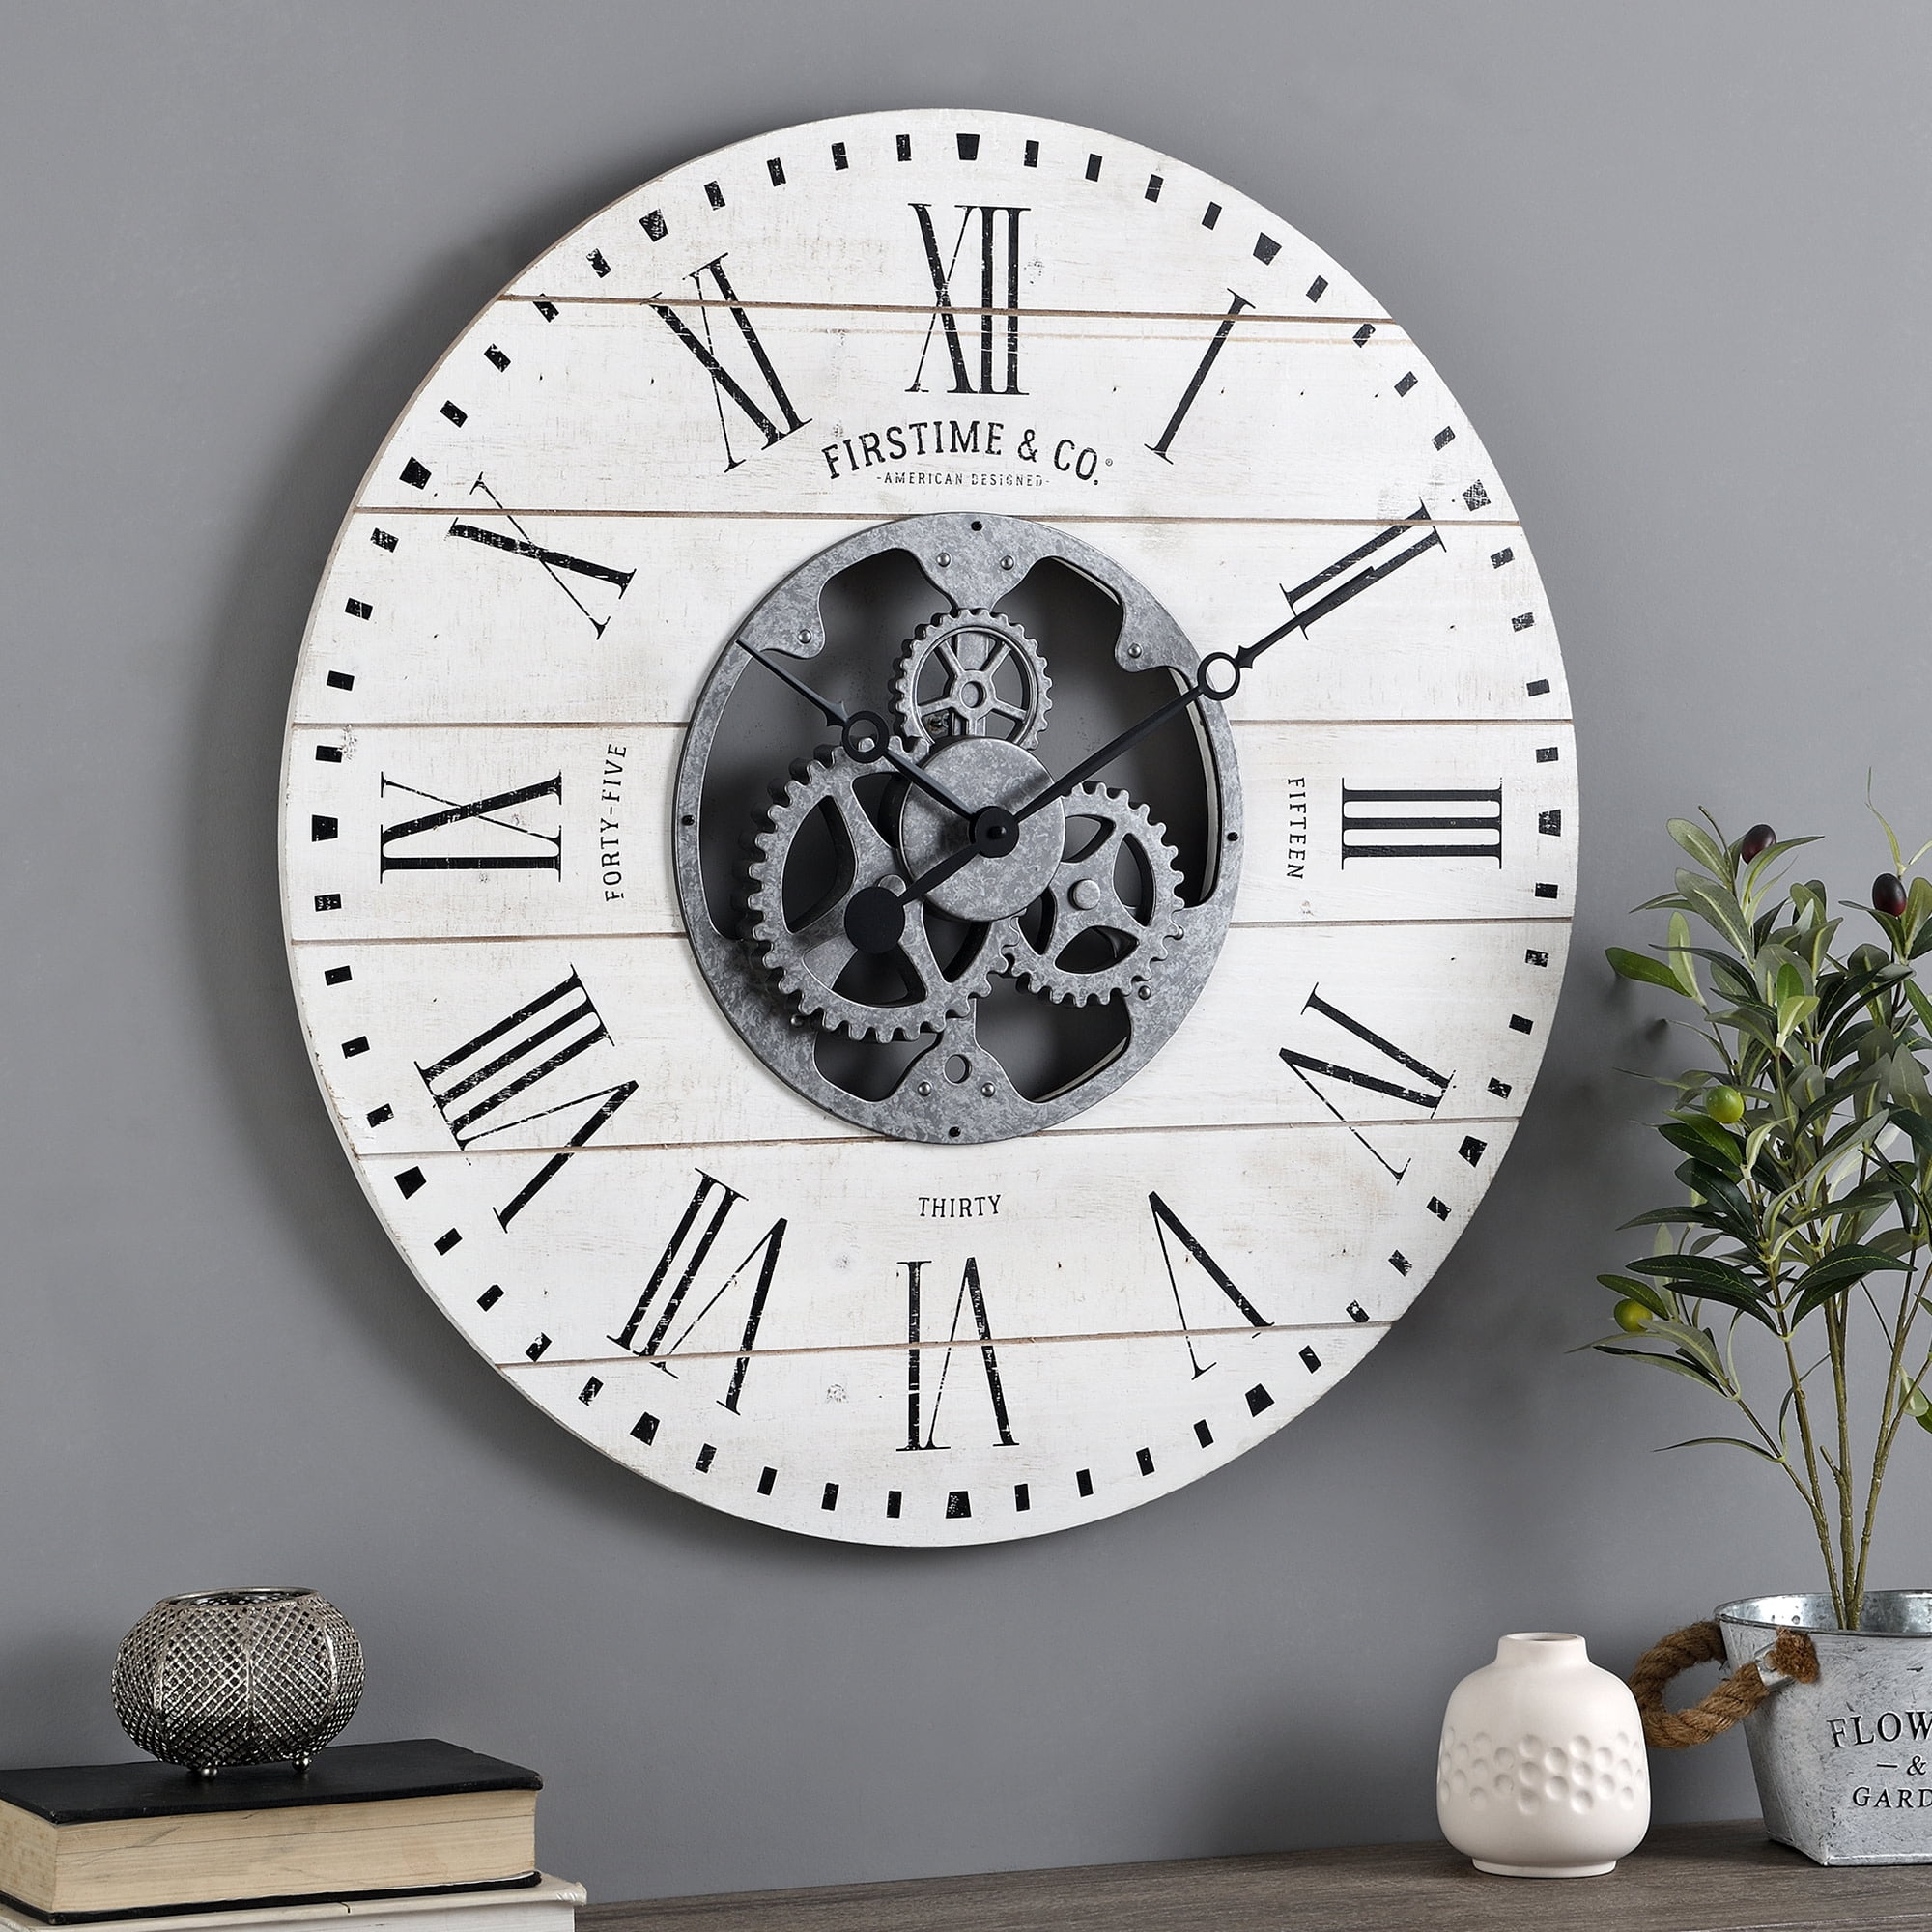 Farmhouse Shiplap Wall Clock American Crafted 29 x 2 ... White FirsTime & Co 